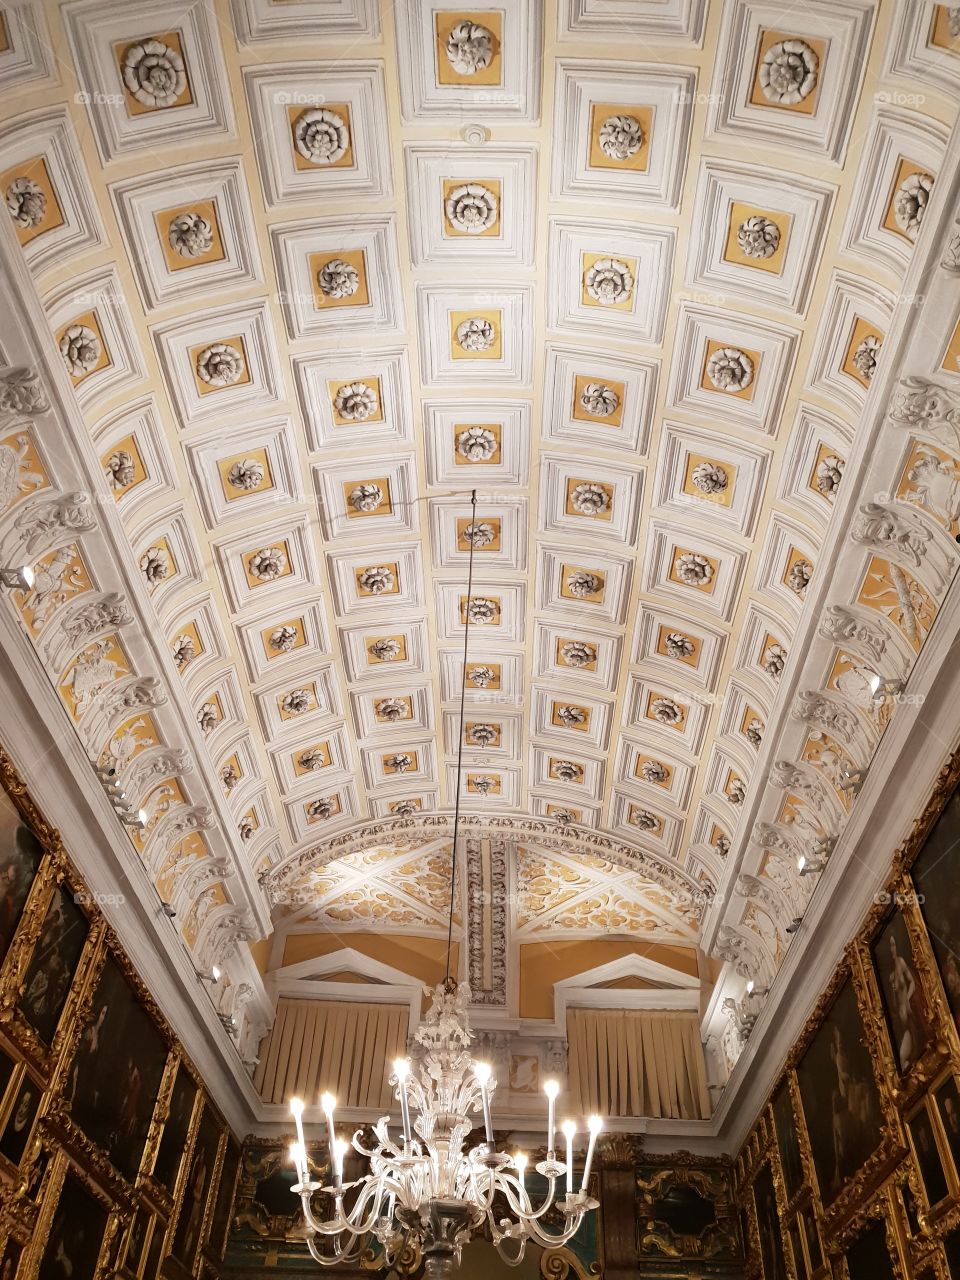 Ceiling of art gallery in baroque castle on Isola Bella in Italy